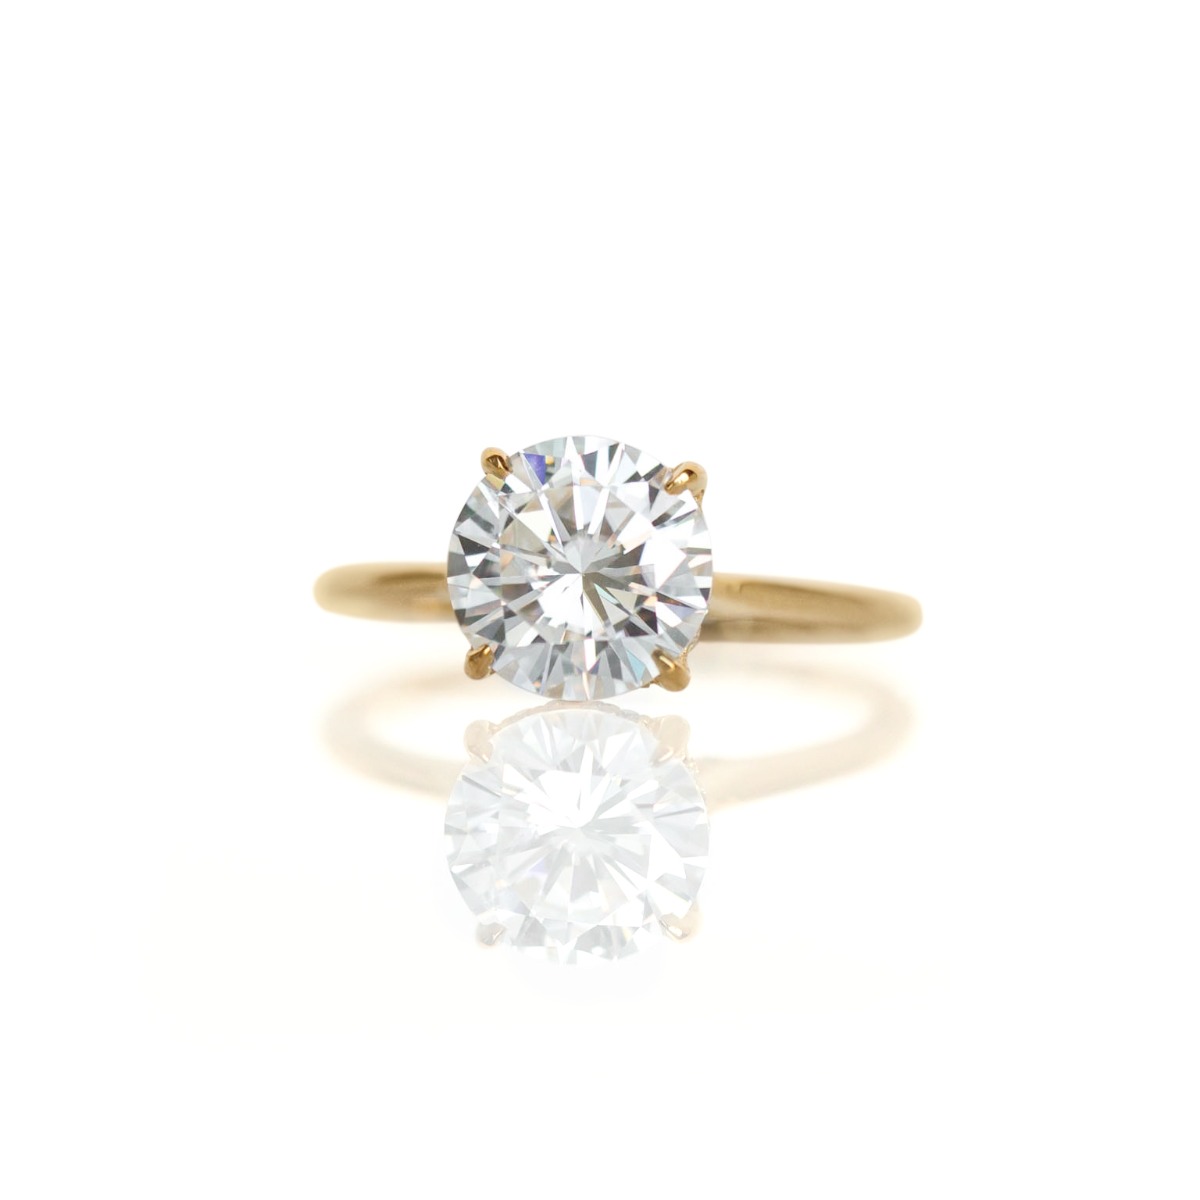 DBK Classic Solitaire Setting With Diamond Basket & Bridge In Yellow Gold